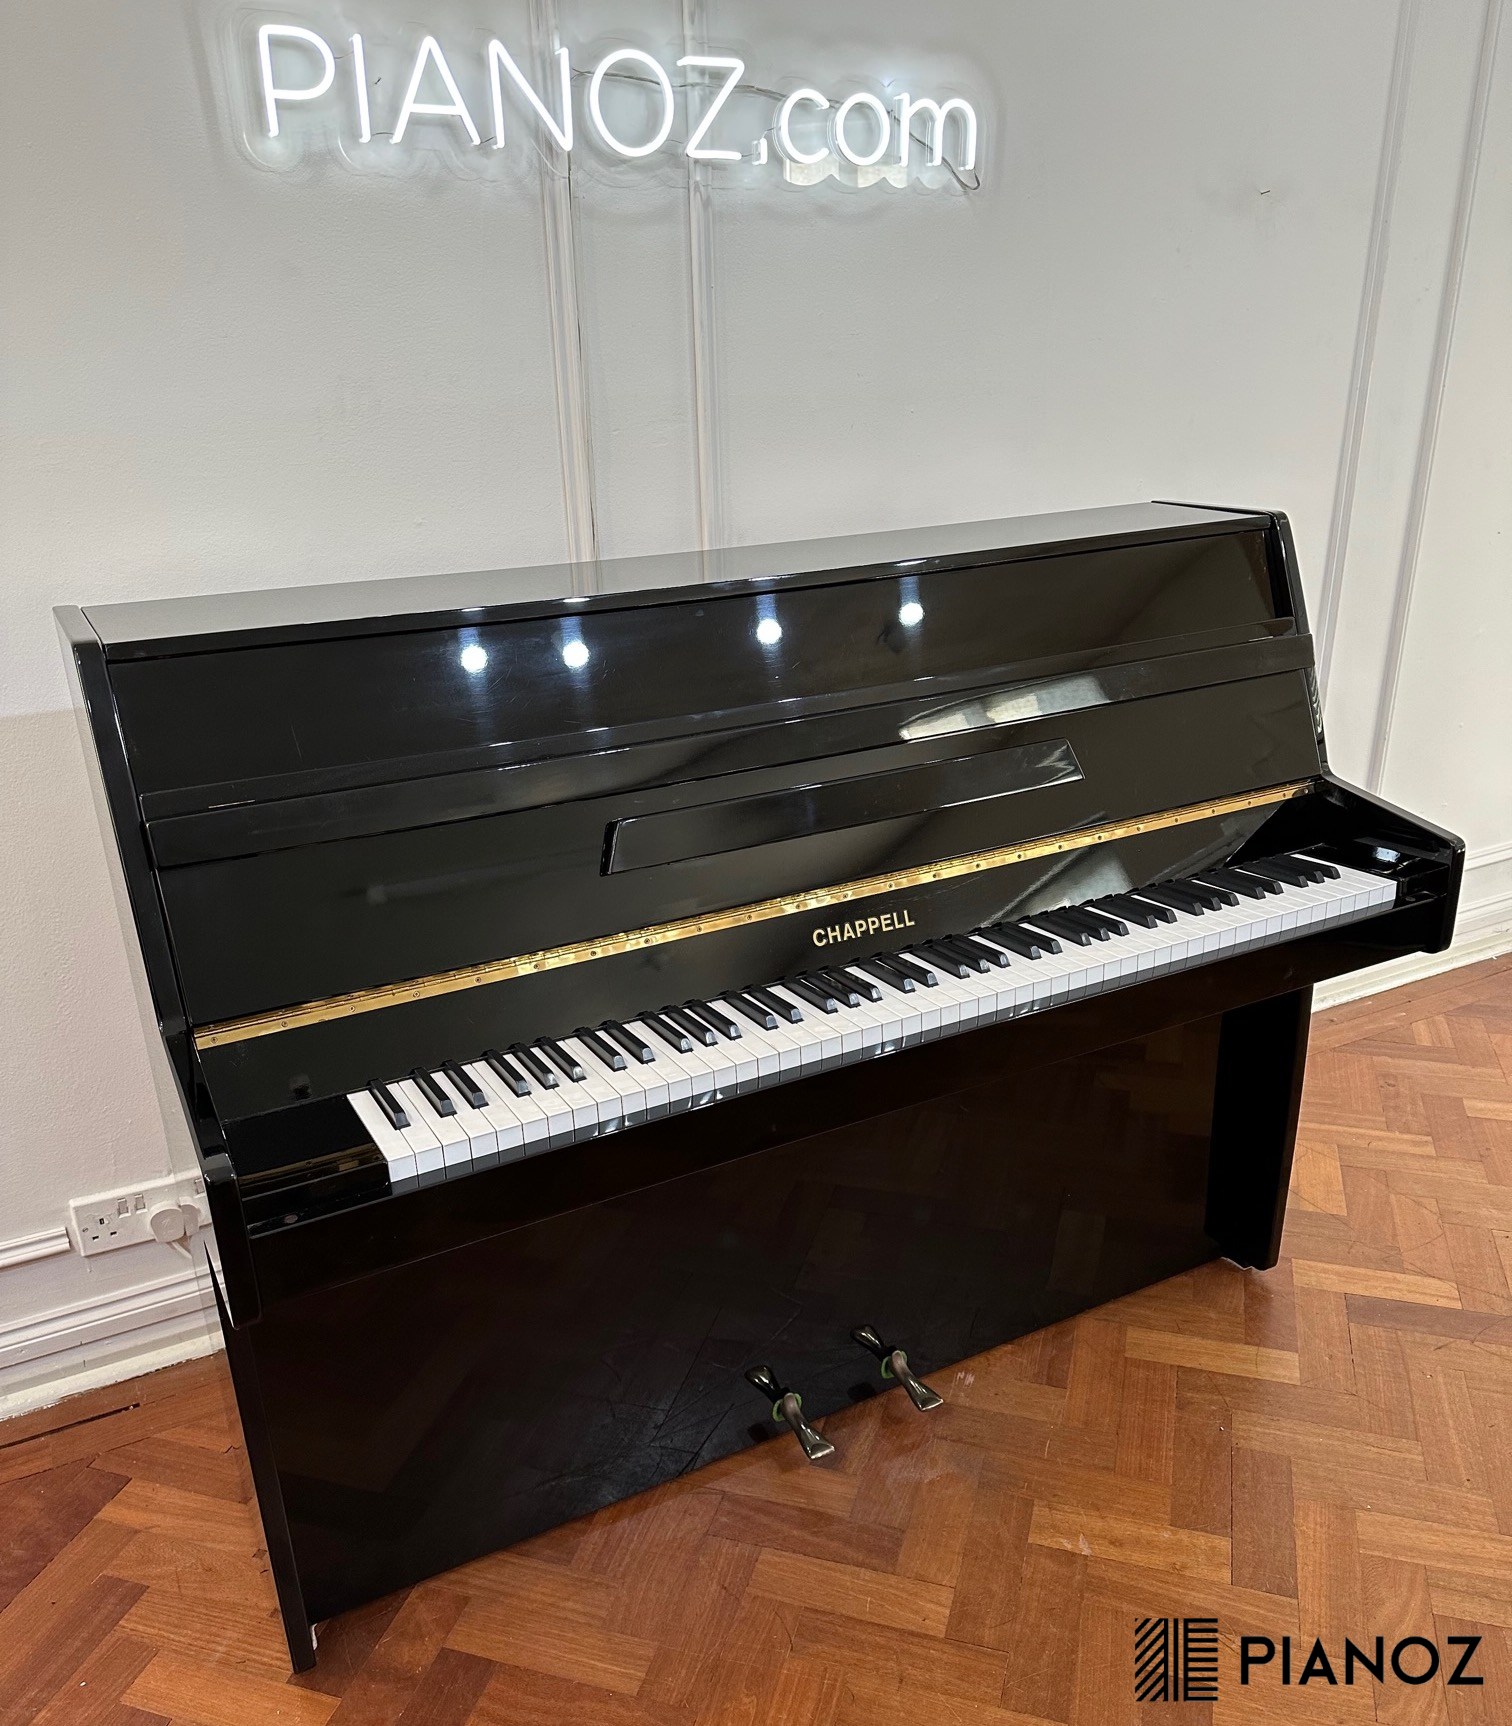 Chappell Black Gloss Upright Piano piano for sale in UK